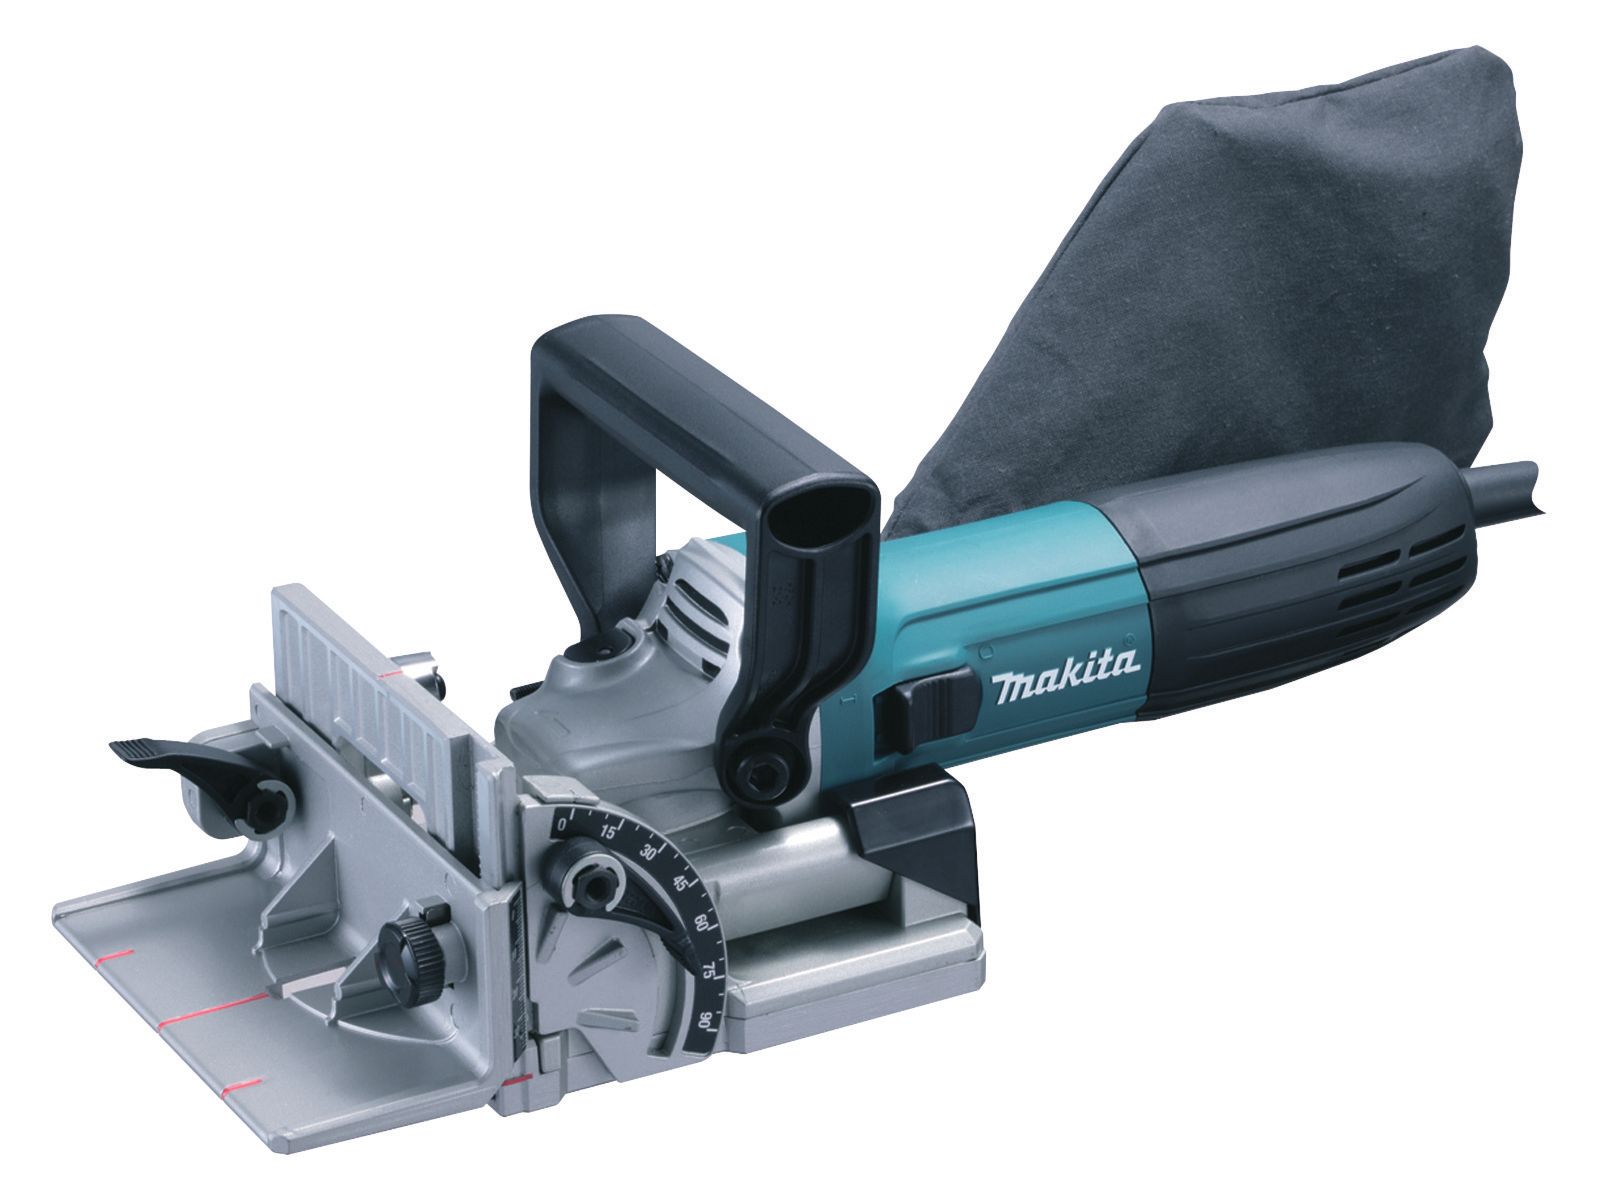 Image of Makita PJ7000 Corded Biscuit Jointer 240V - 700W